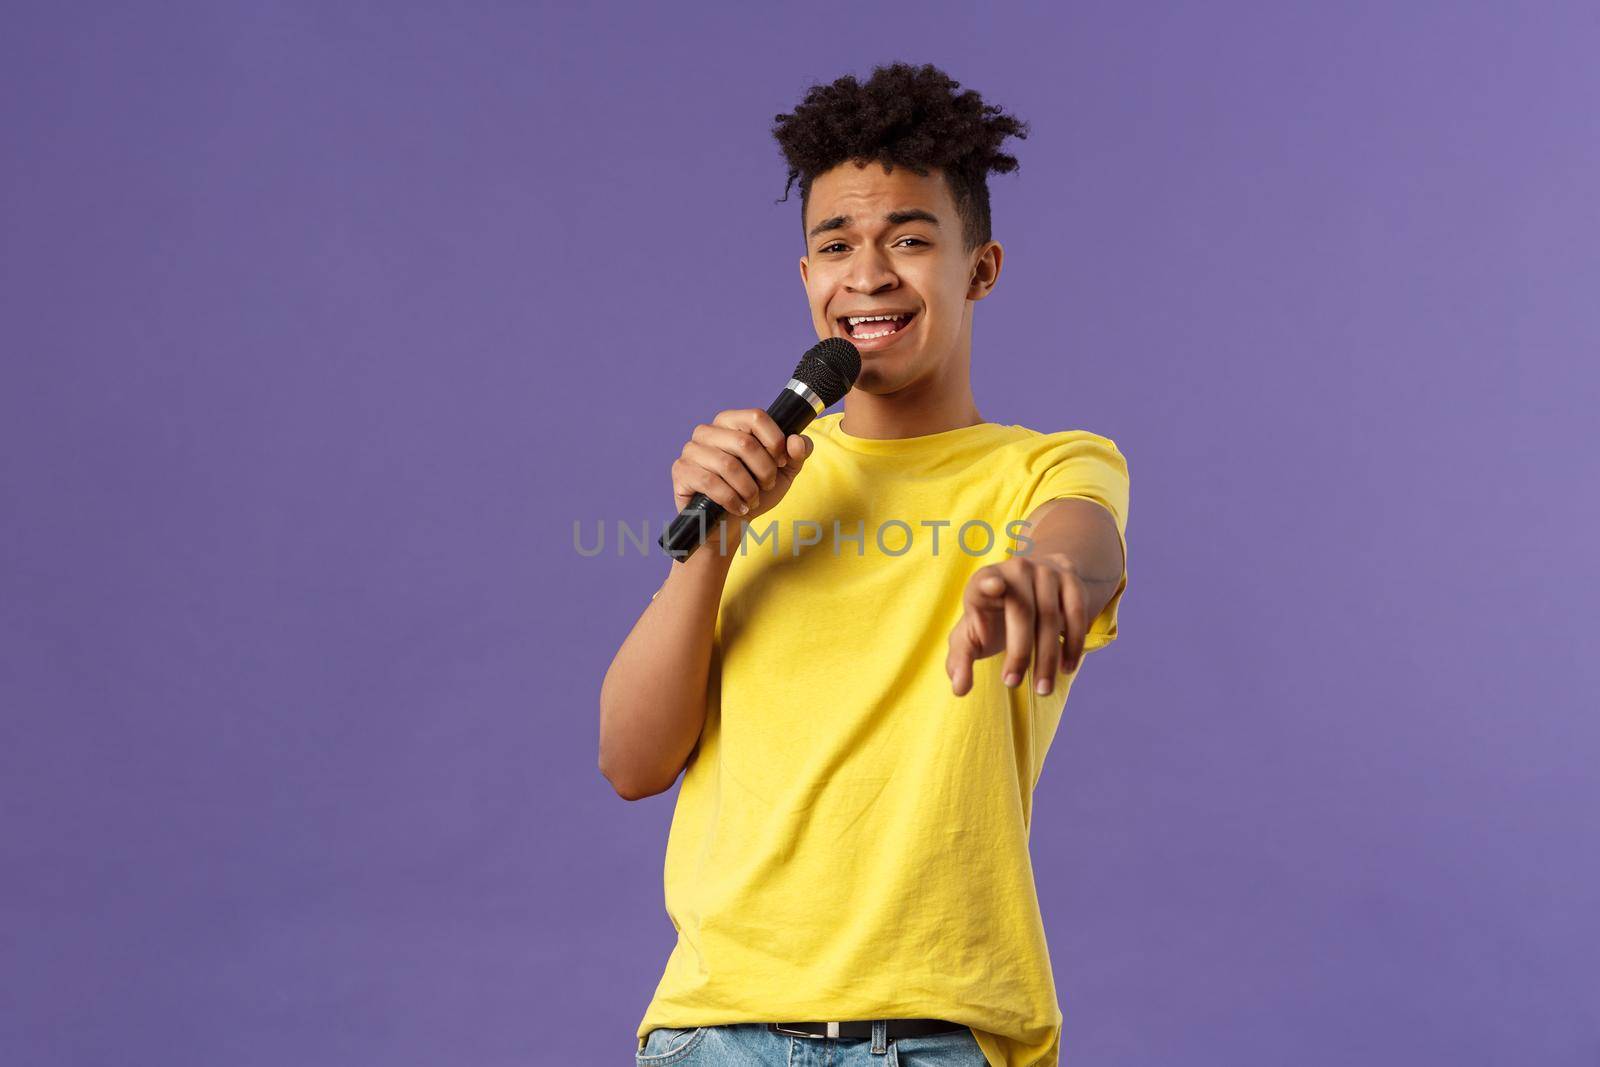 This song is for you. Portrait of romantic carefree hispanic man singing karaoke, pointing at camera as dedicate his performance, holding microphone, standing purple background.